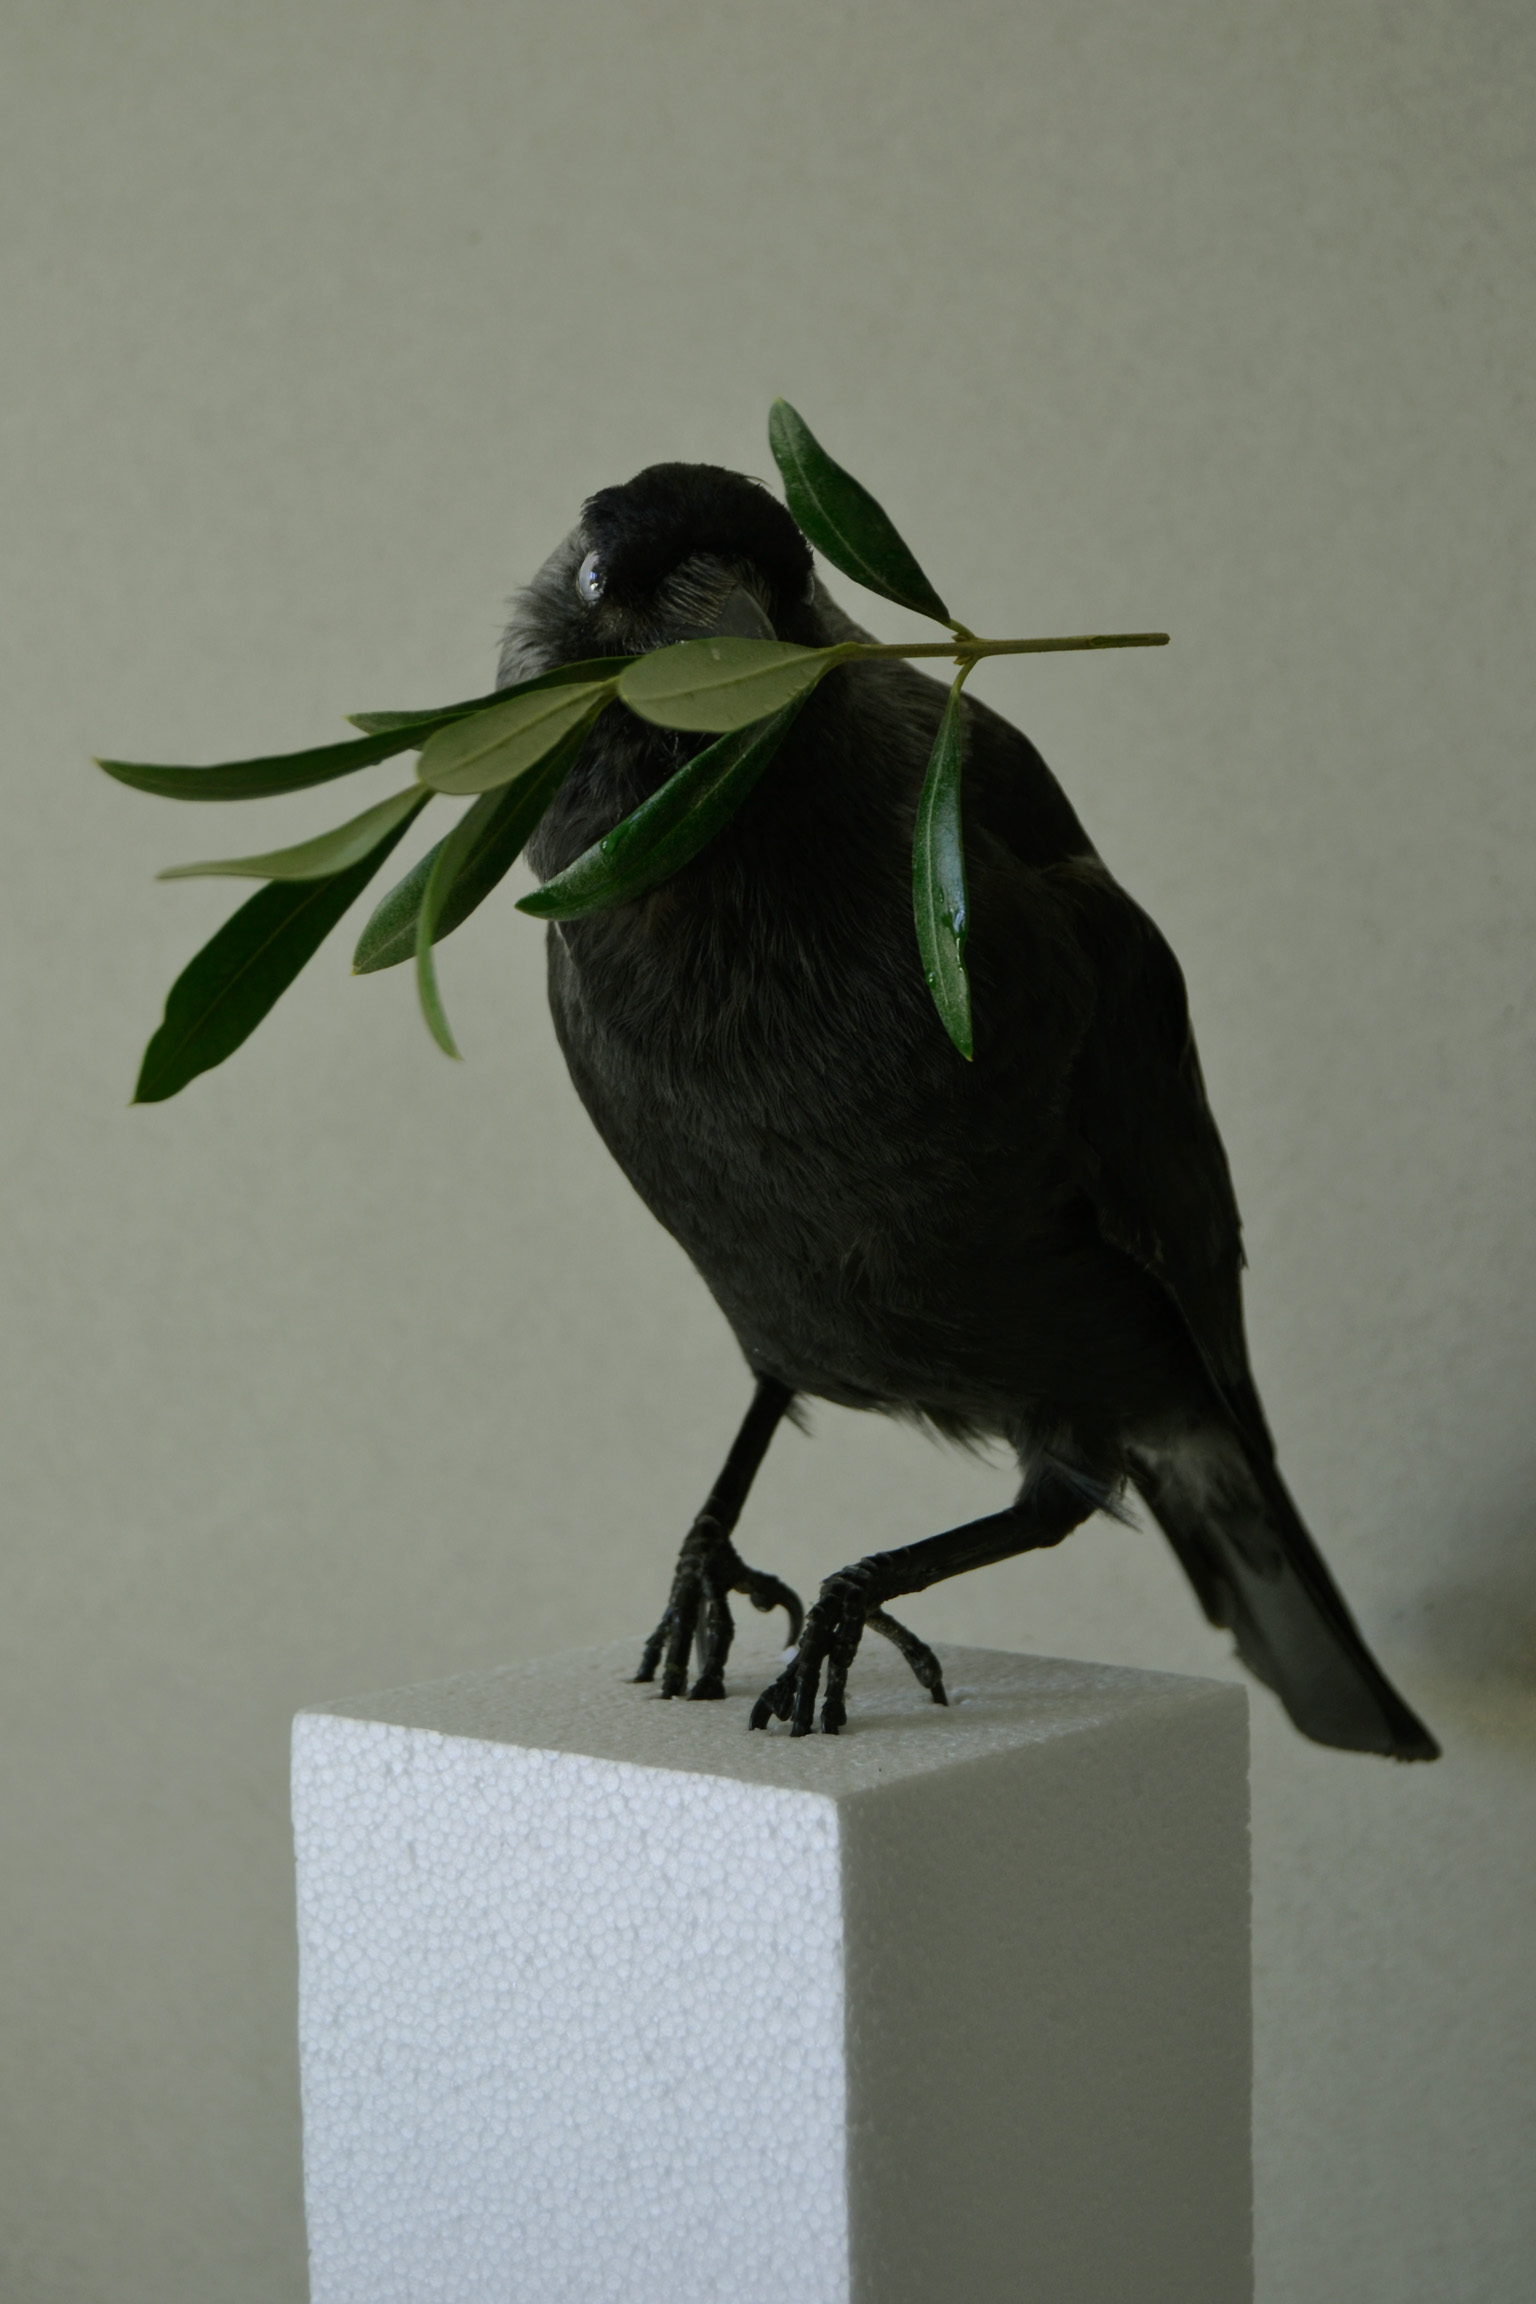 Peace assemblage ,taxidermy bird and olive branch,40x30cm 2014.